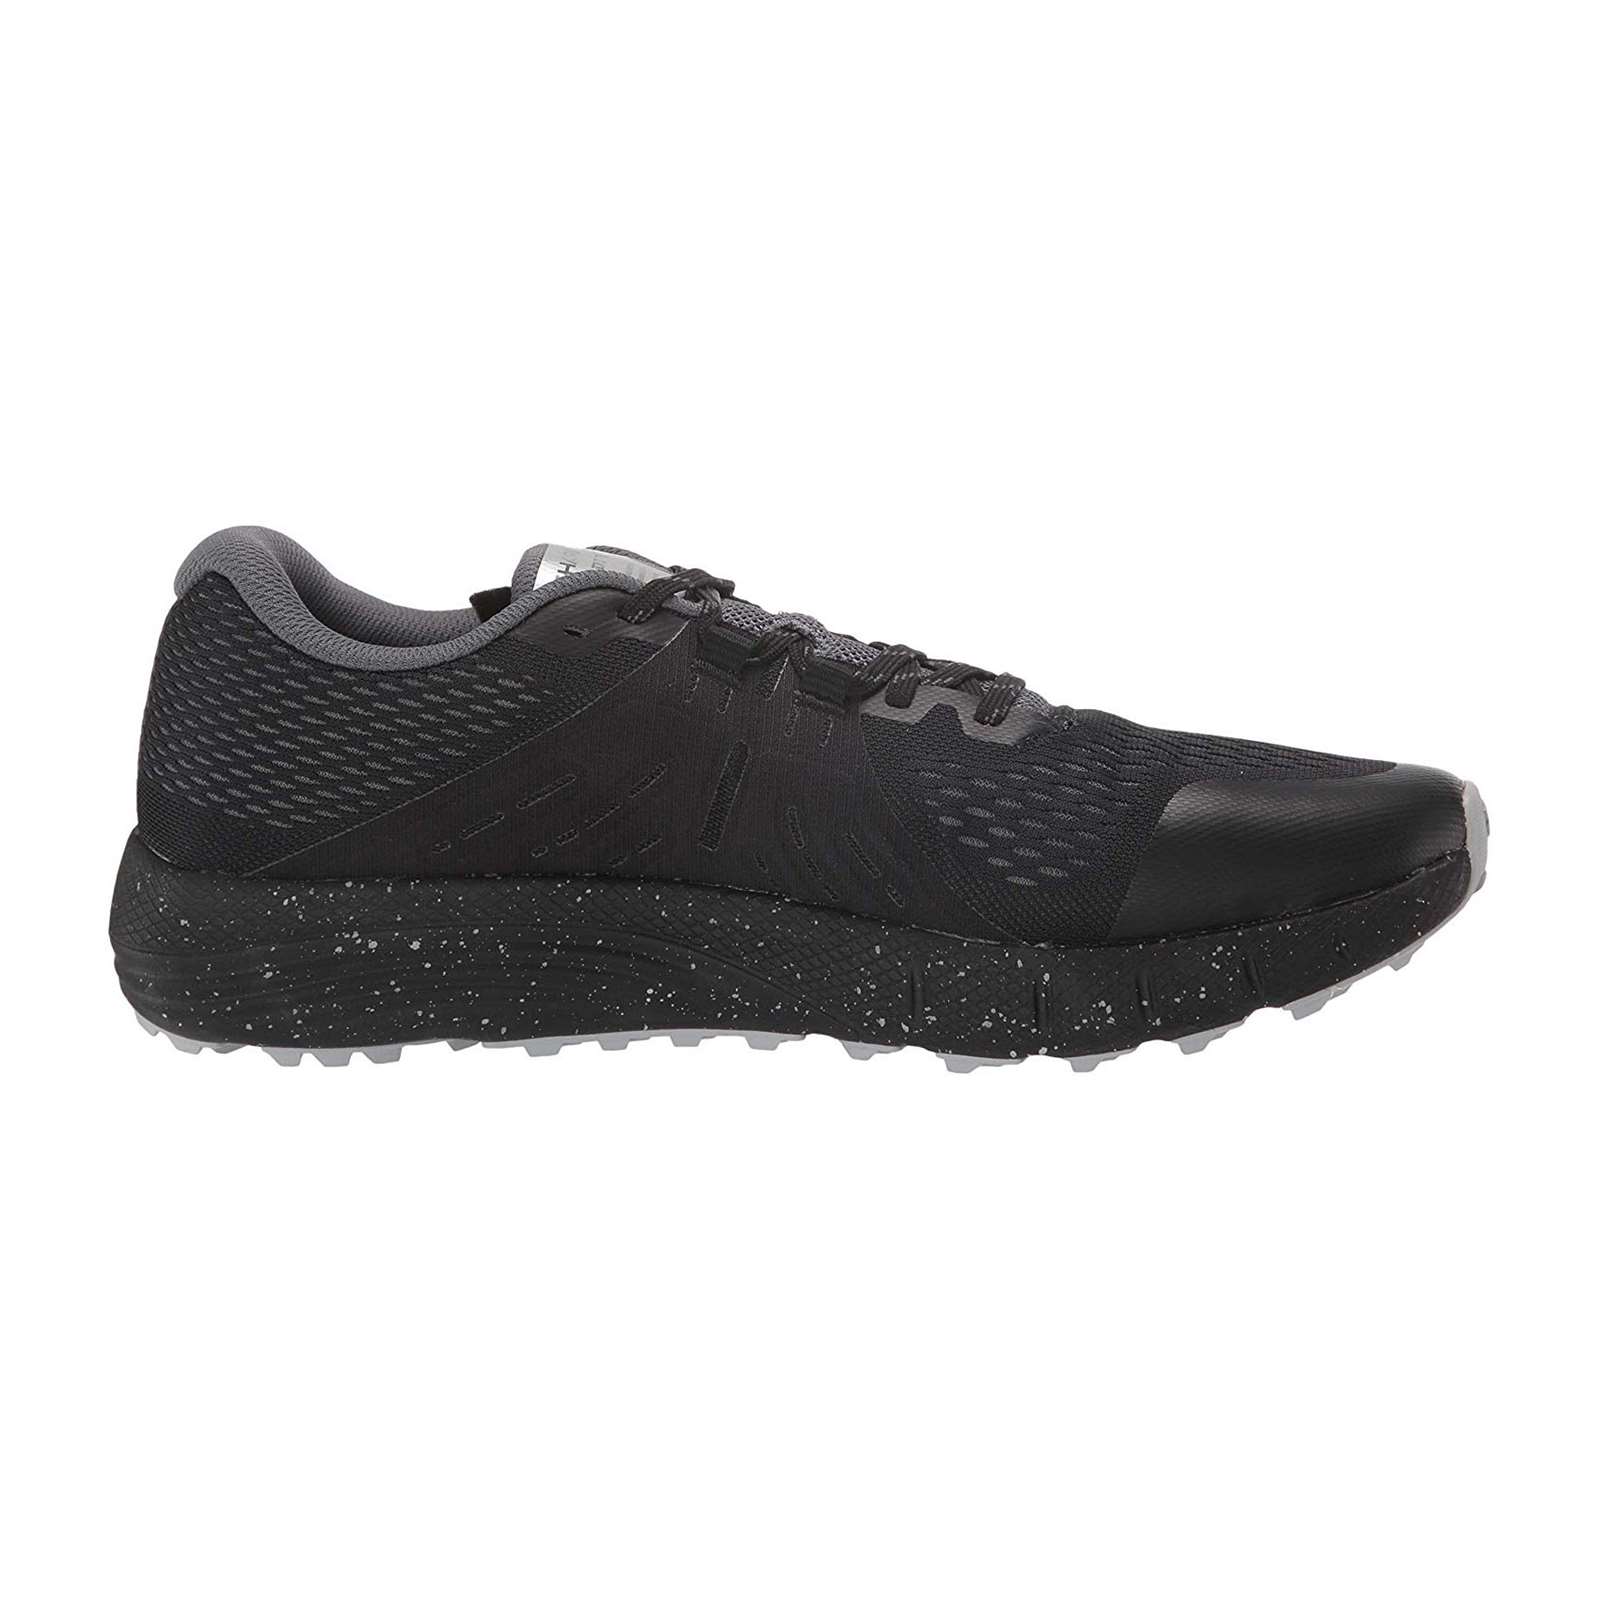 Men's Under Armour Charged Bandit Trail Running Shoe - image 4 of 7